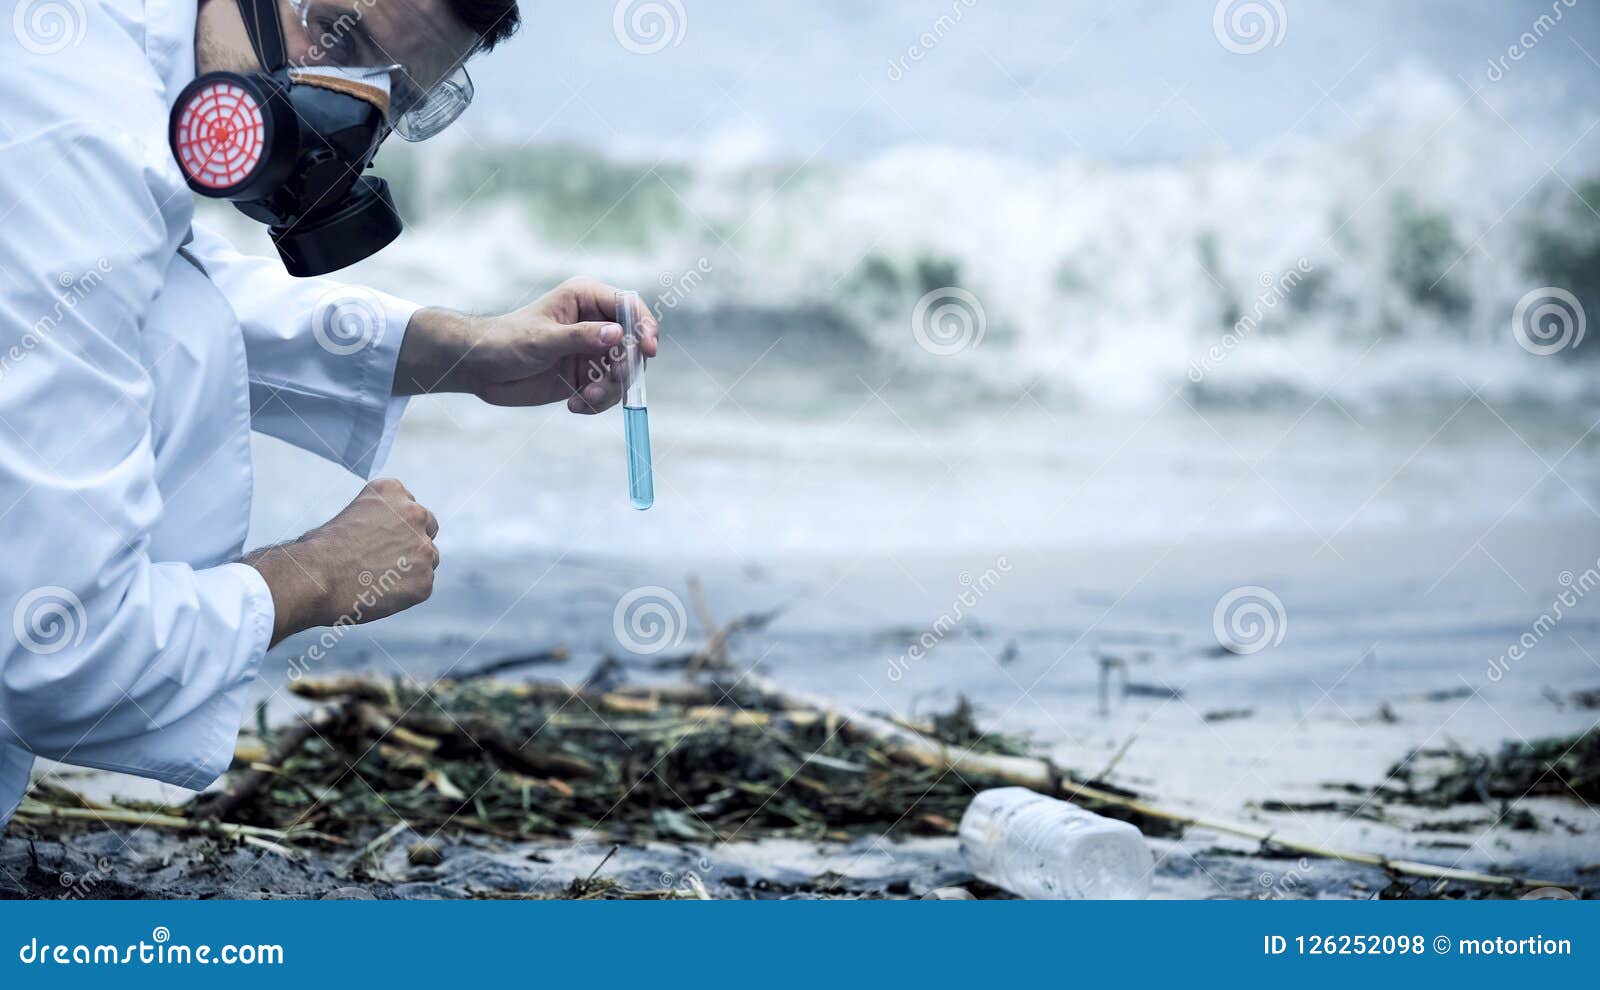 Toxicologist Checking Polluted Water, Splashing on Shore, Environmental